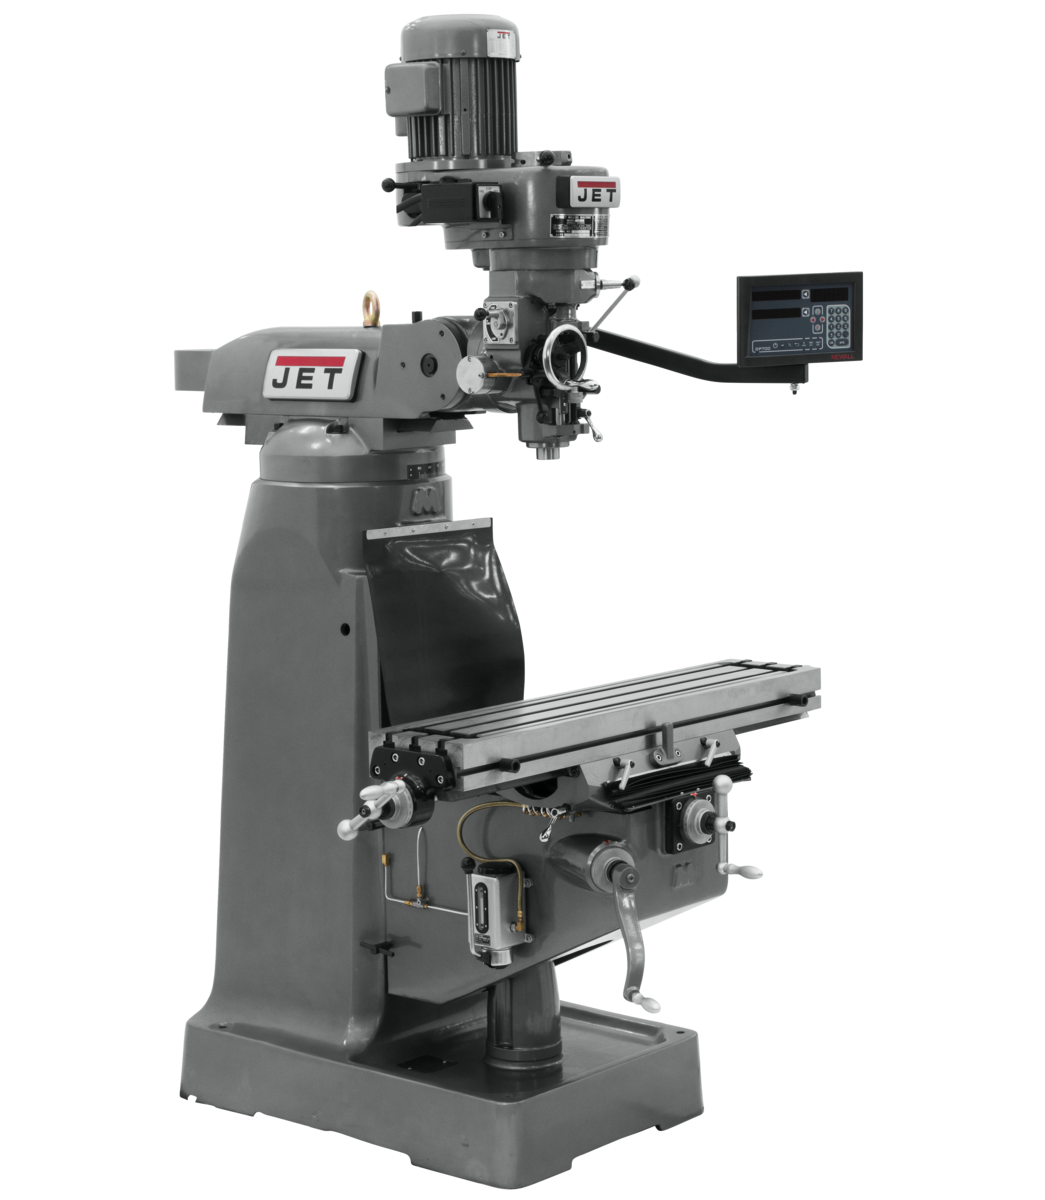 JVM-836-1 Mill With 3-Axis Newall DP700 DRO (Knee)